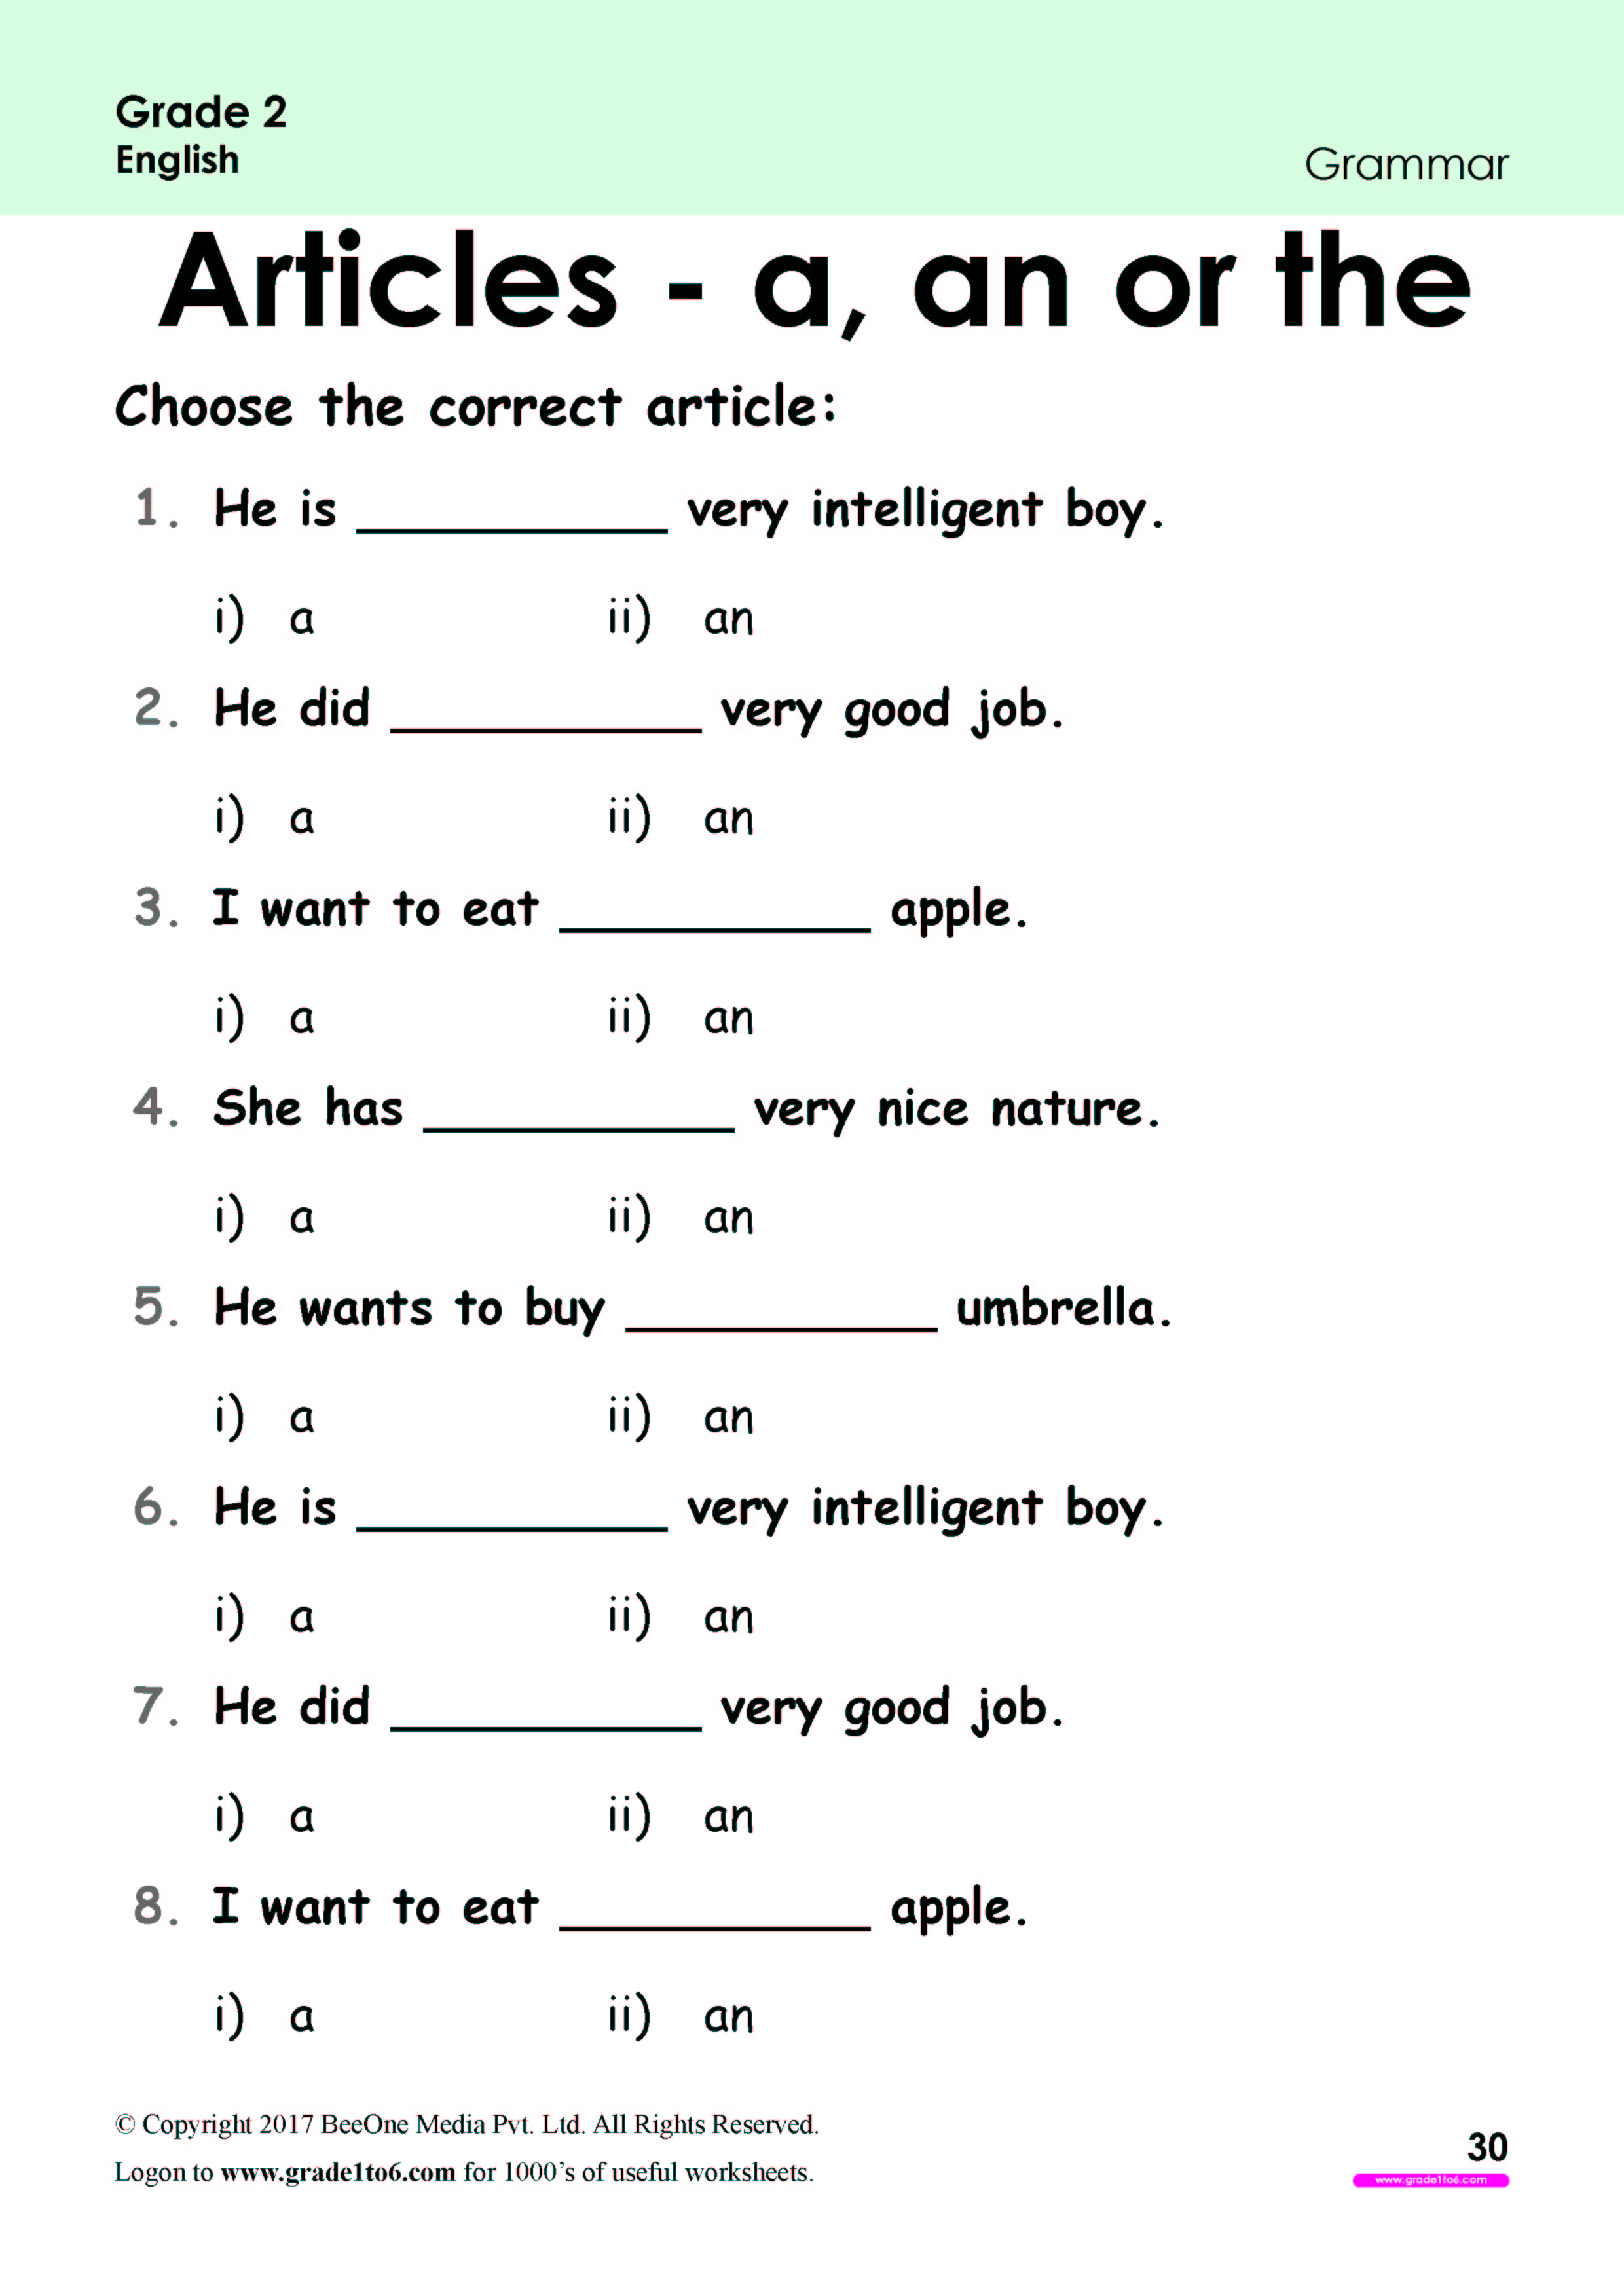 grade-8-grammar-lesson-27-at-on-and-in-prepositions-of-time-english-grammar-worksheets